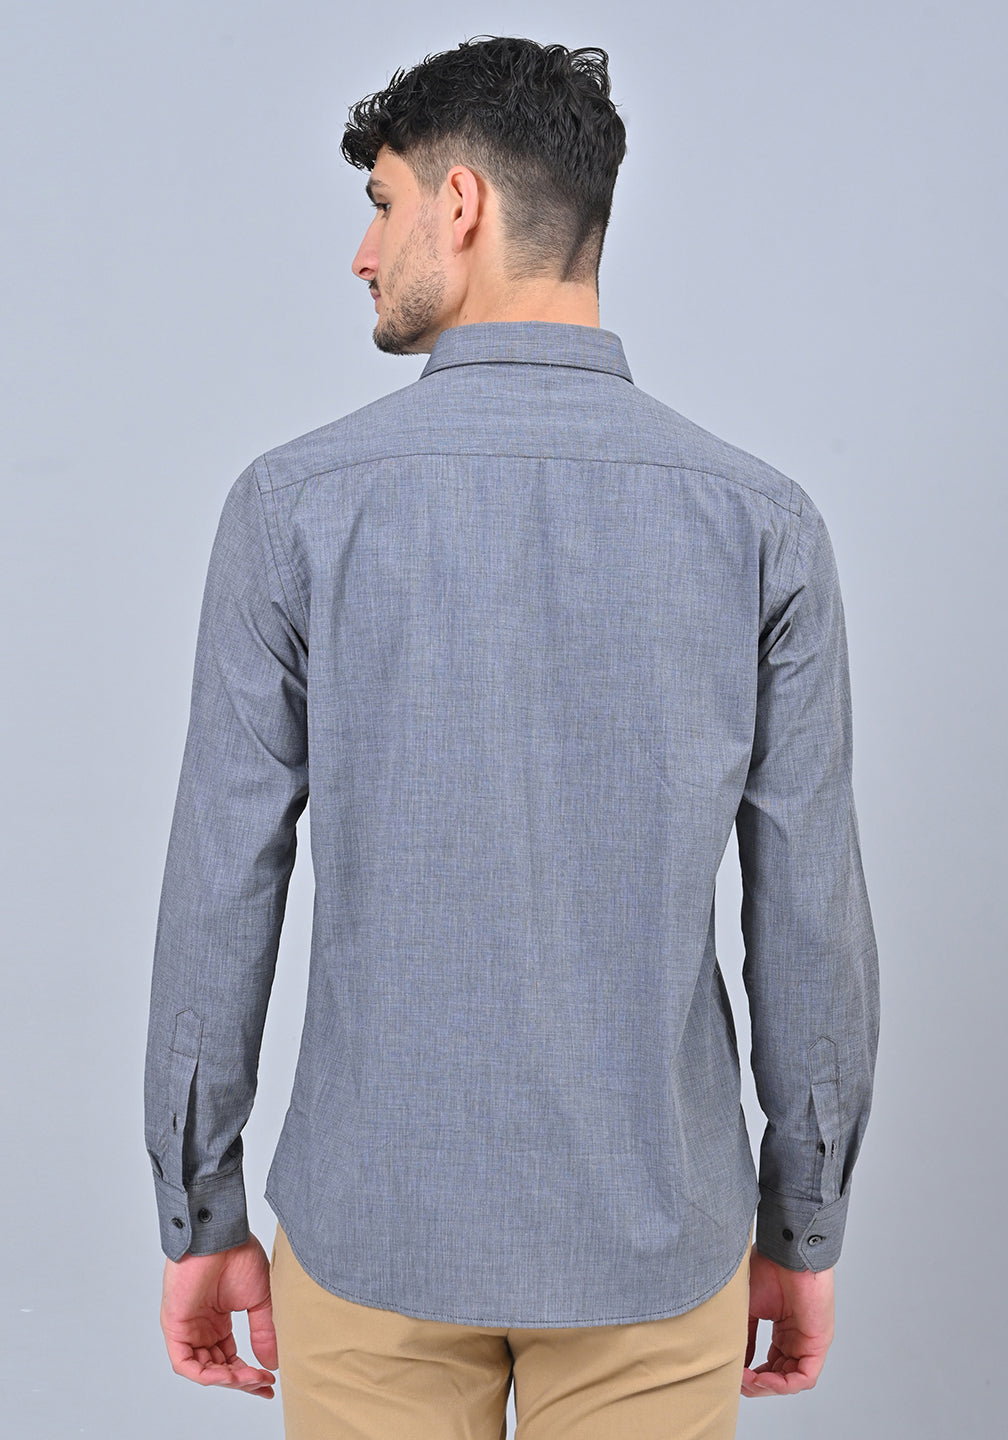 Grey Colour Solid Formal Full Sleeve Shirt